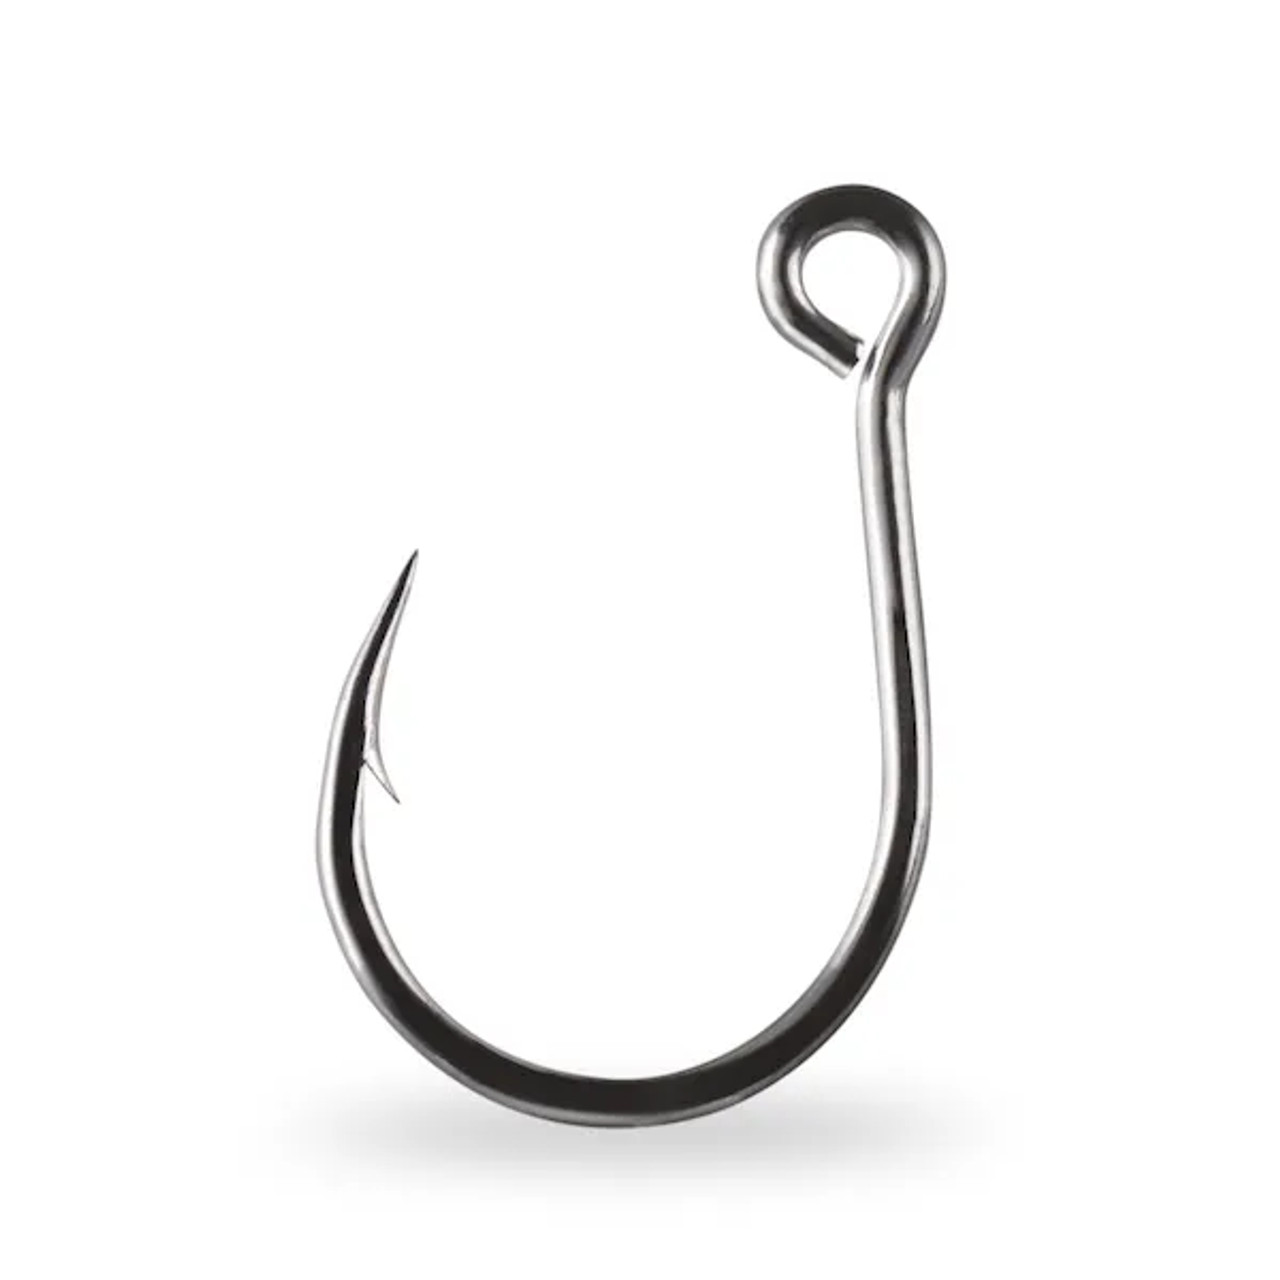 Mustad Kaiju In-Line Single 4X Strong Wide Round Bend Forged Eyed